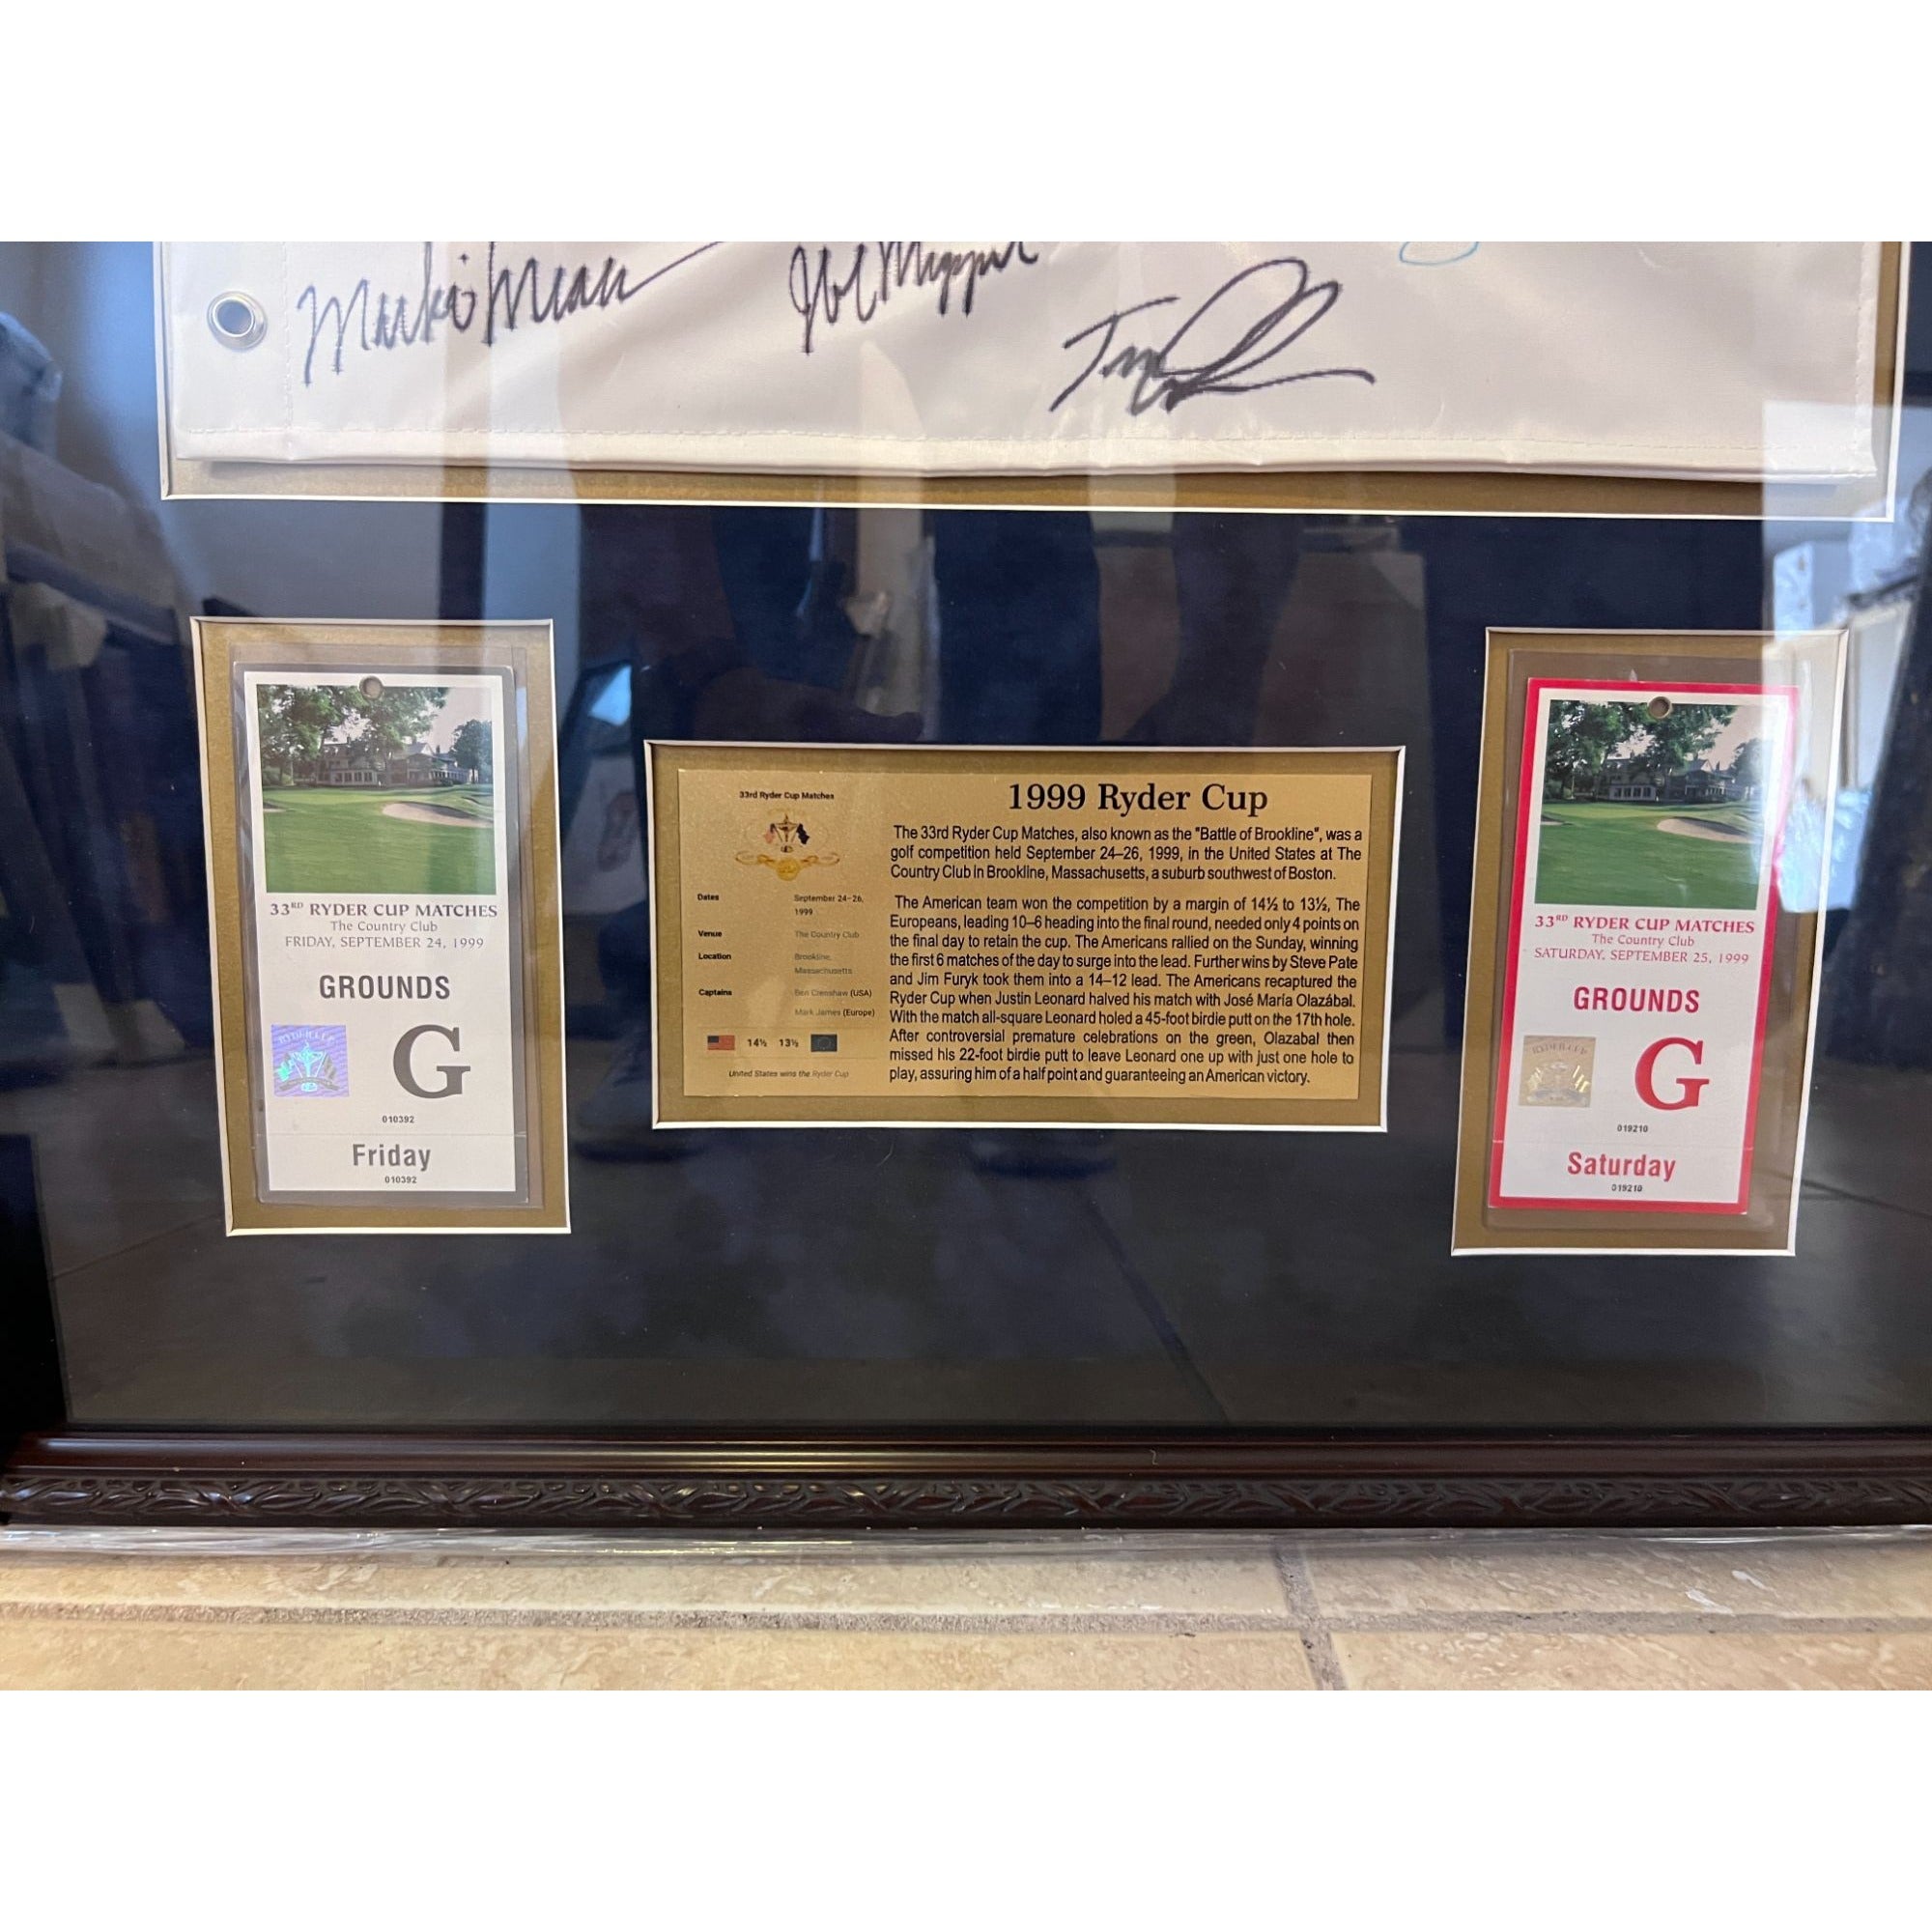 USA 1999 Ryder Cup pin flag framed 28x31 and signed with proof Phil Mickelson Payne Stewart complete team